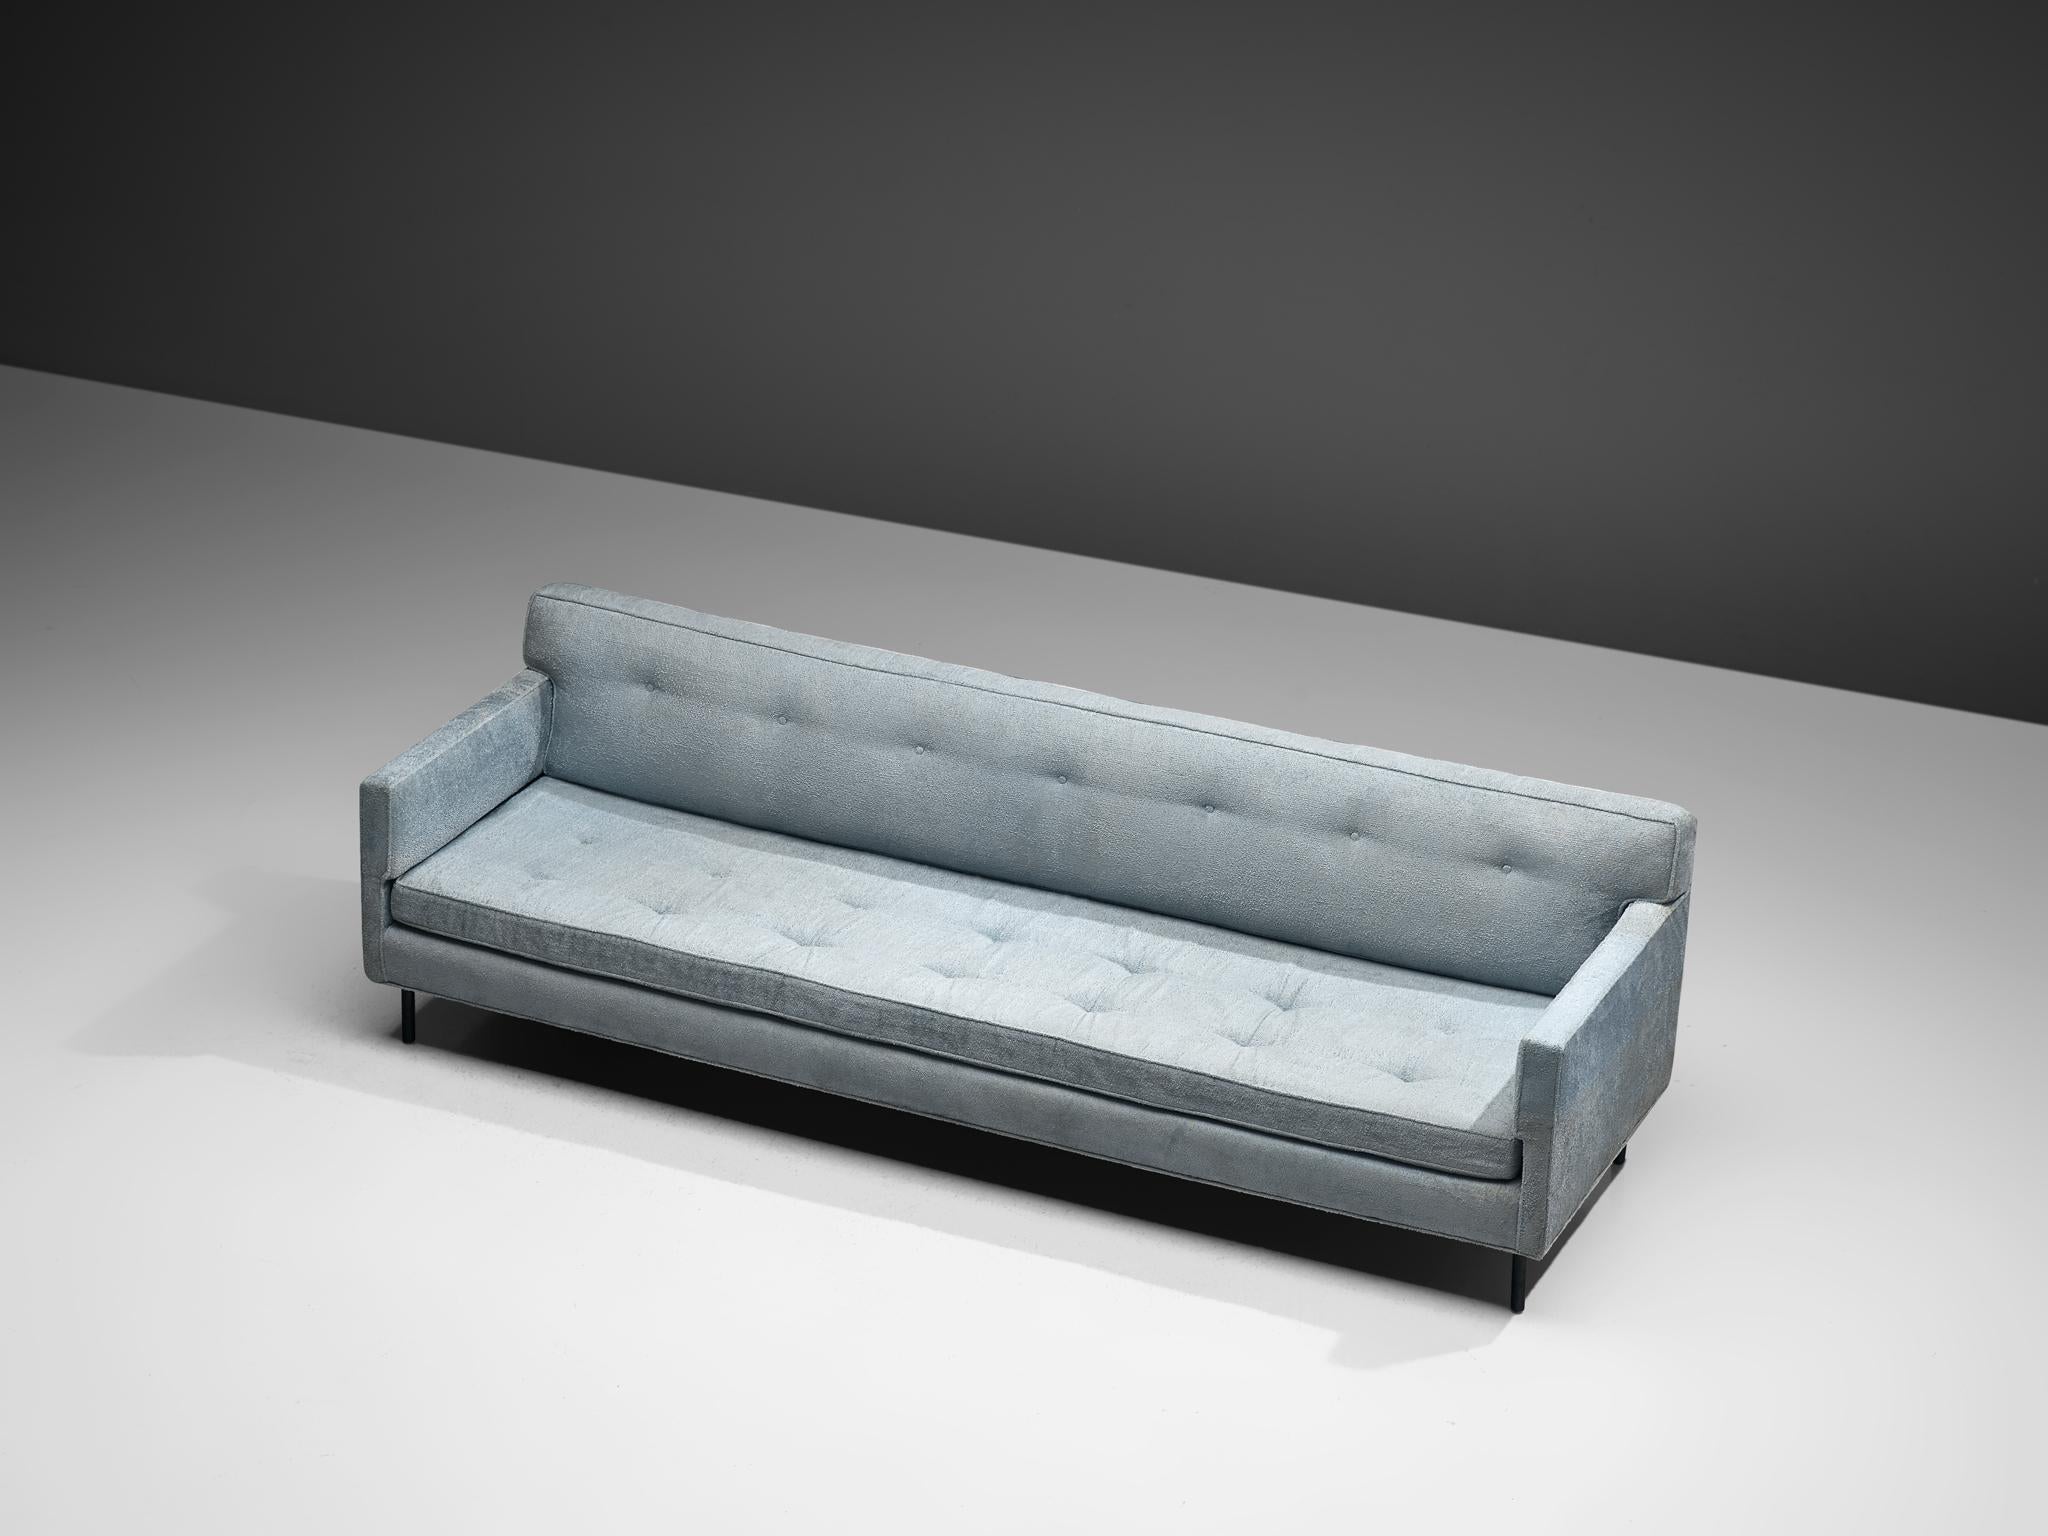 Edward Wormley for Dunbar, sofa, model 5150, fabric, metal, United States, 1950s. 

The sofa exudes a simple and elegant style, reminiscent of the classic design elements typically associated with Edward Wormley. The sofa features a light blue